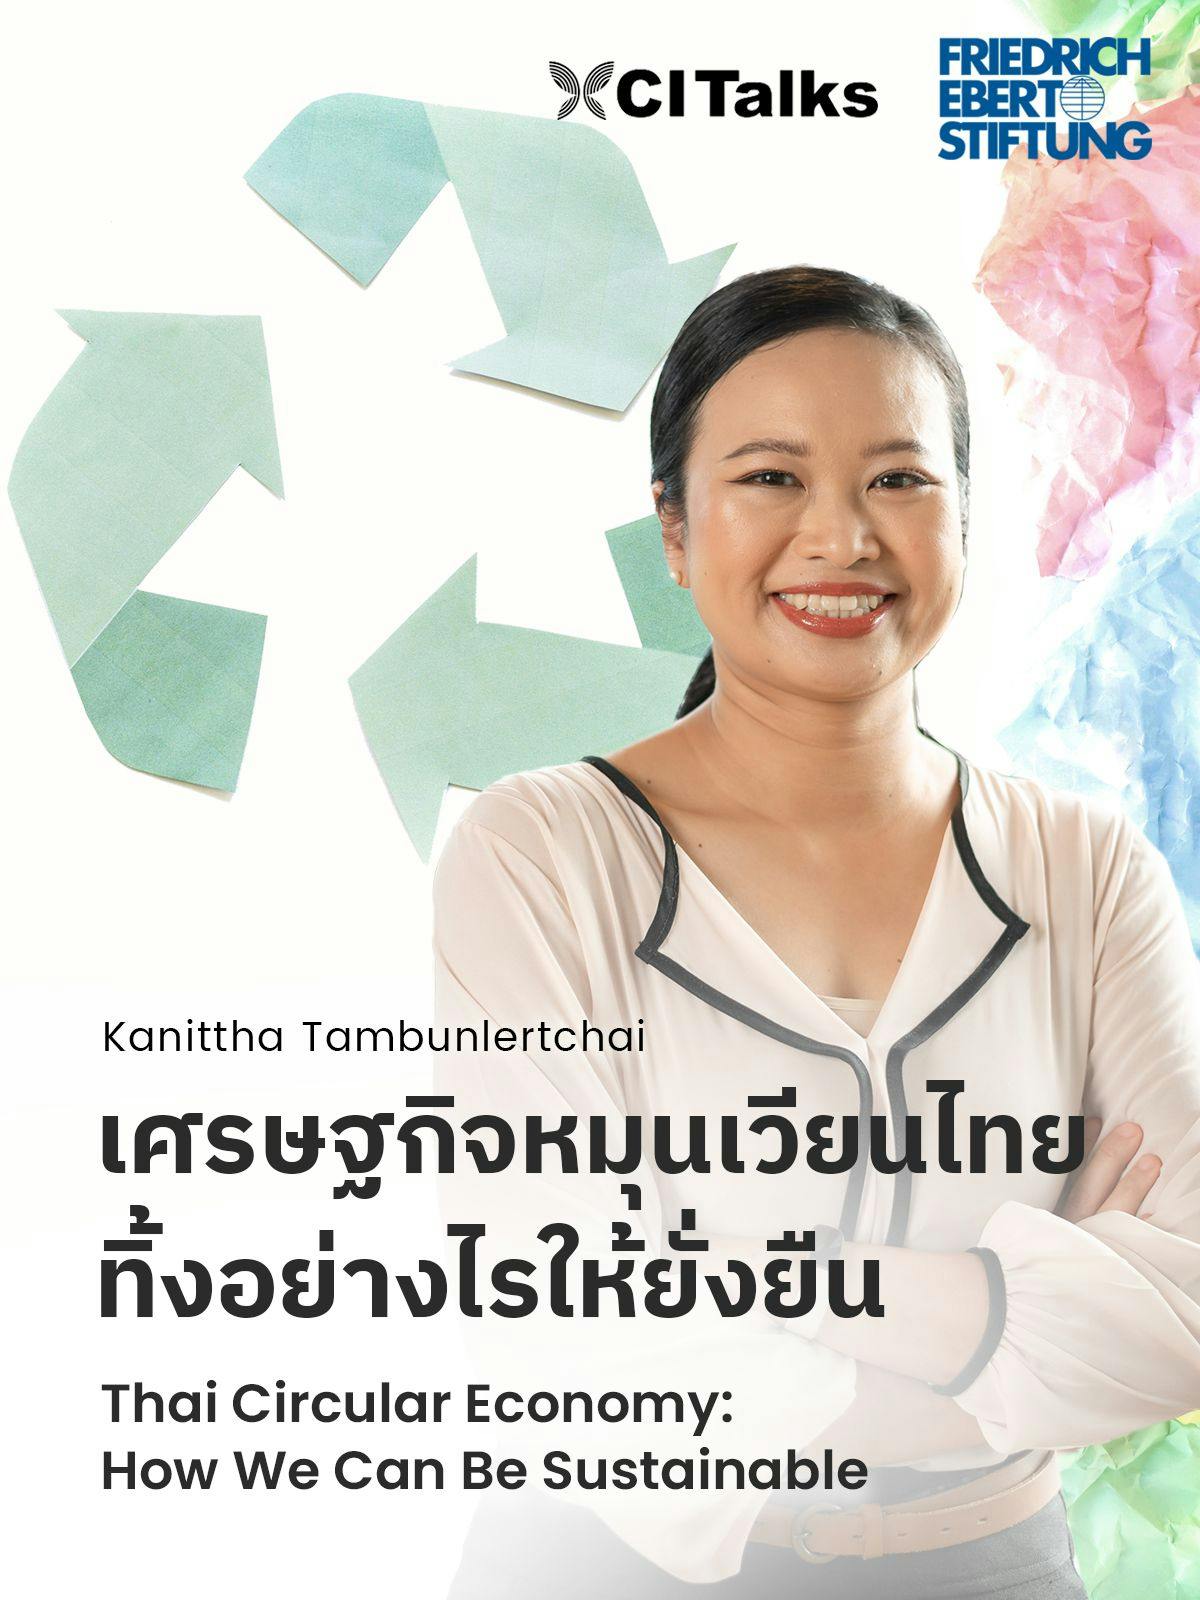 Thai Circular Economy: How to be Sustainable